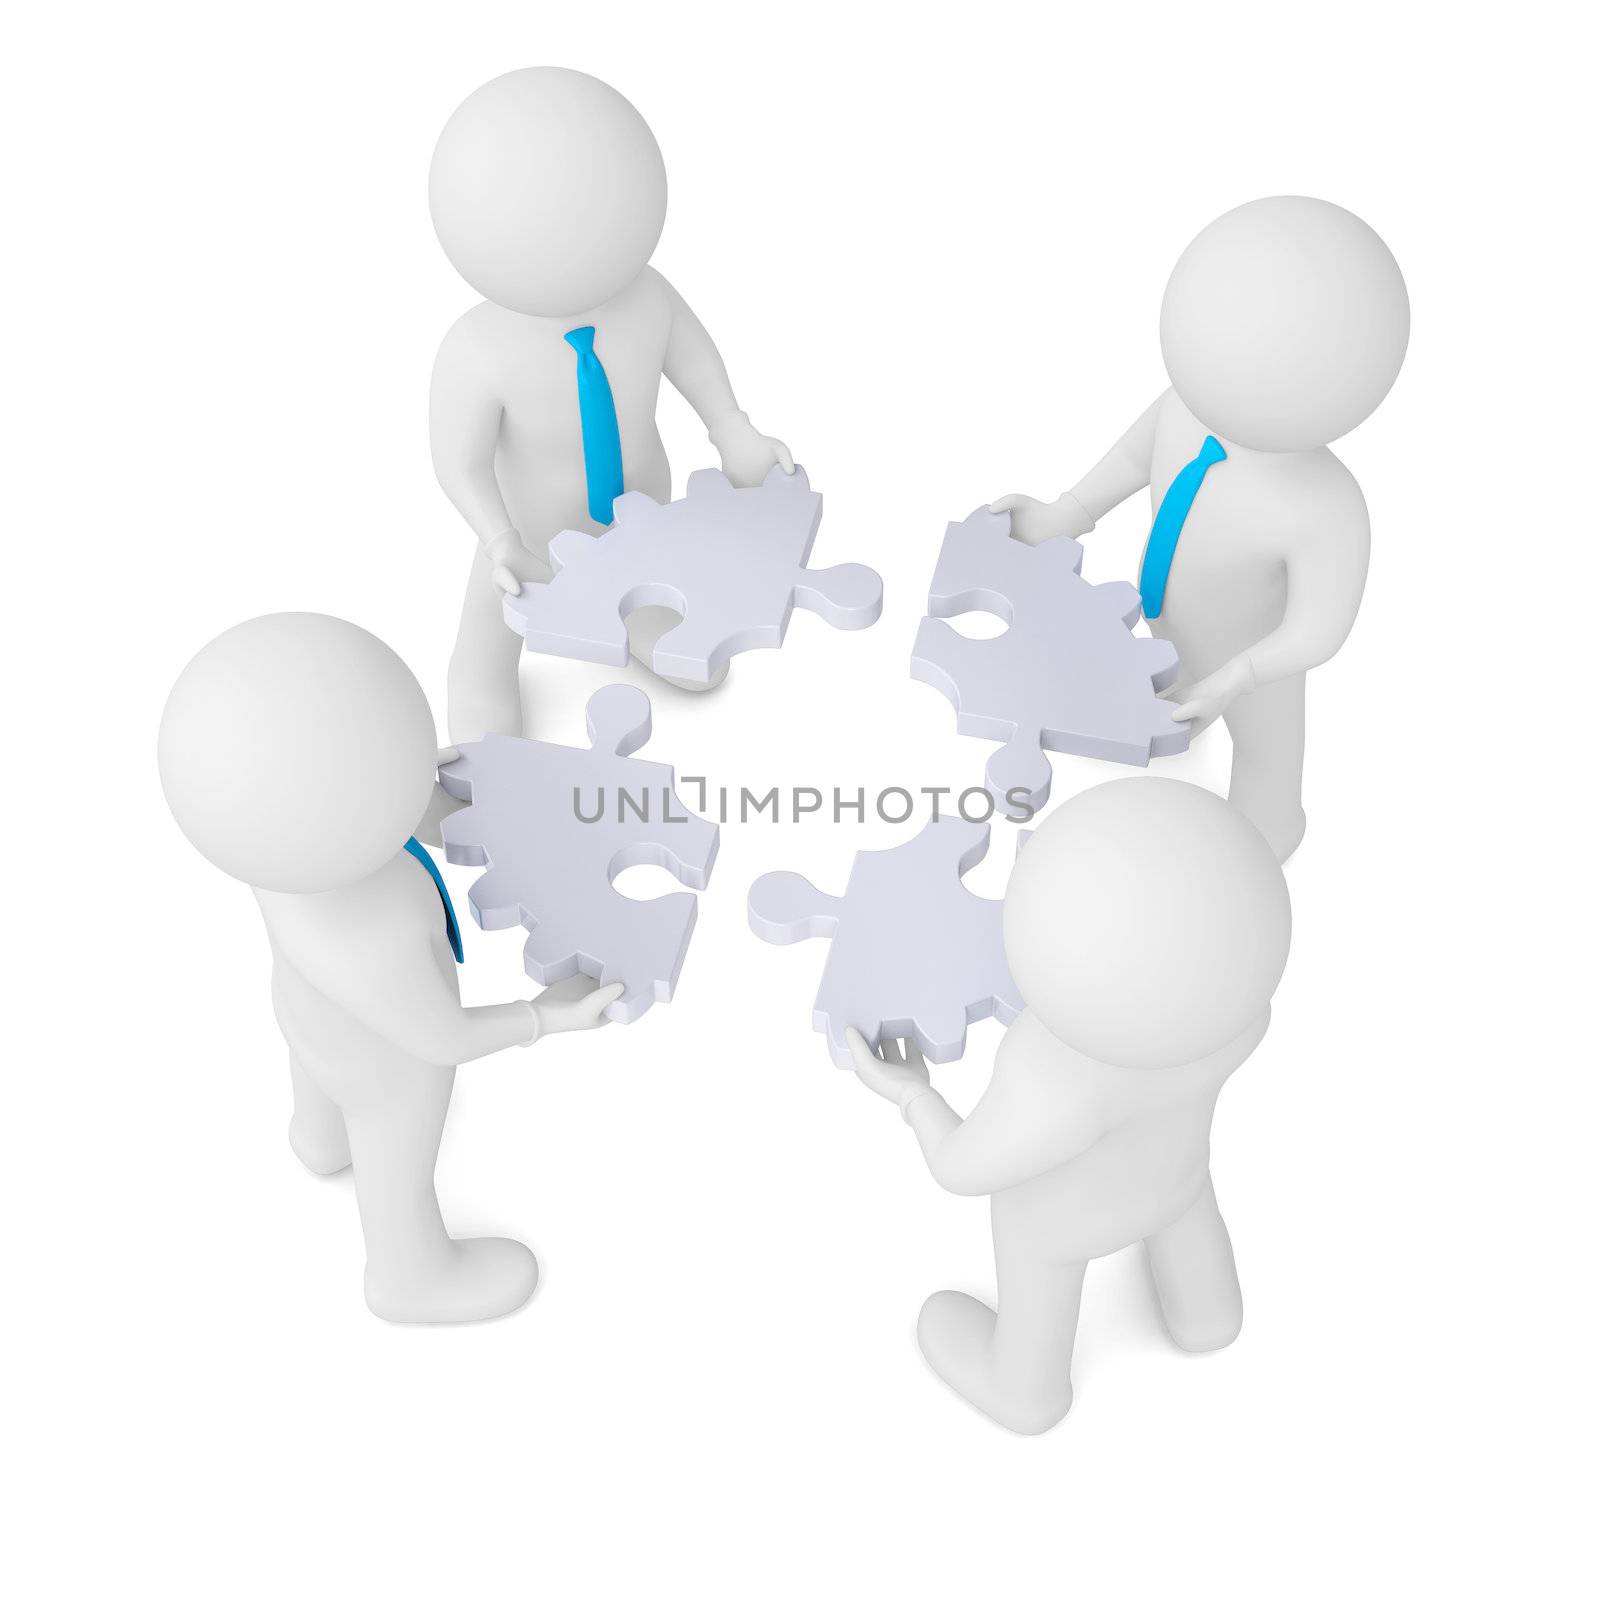 Four man holding gear consisting of puzzles by cherezoff